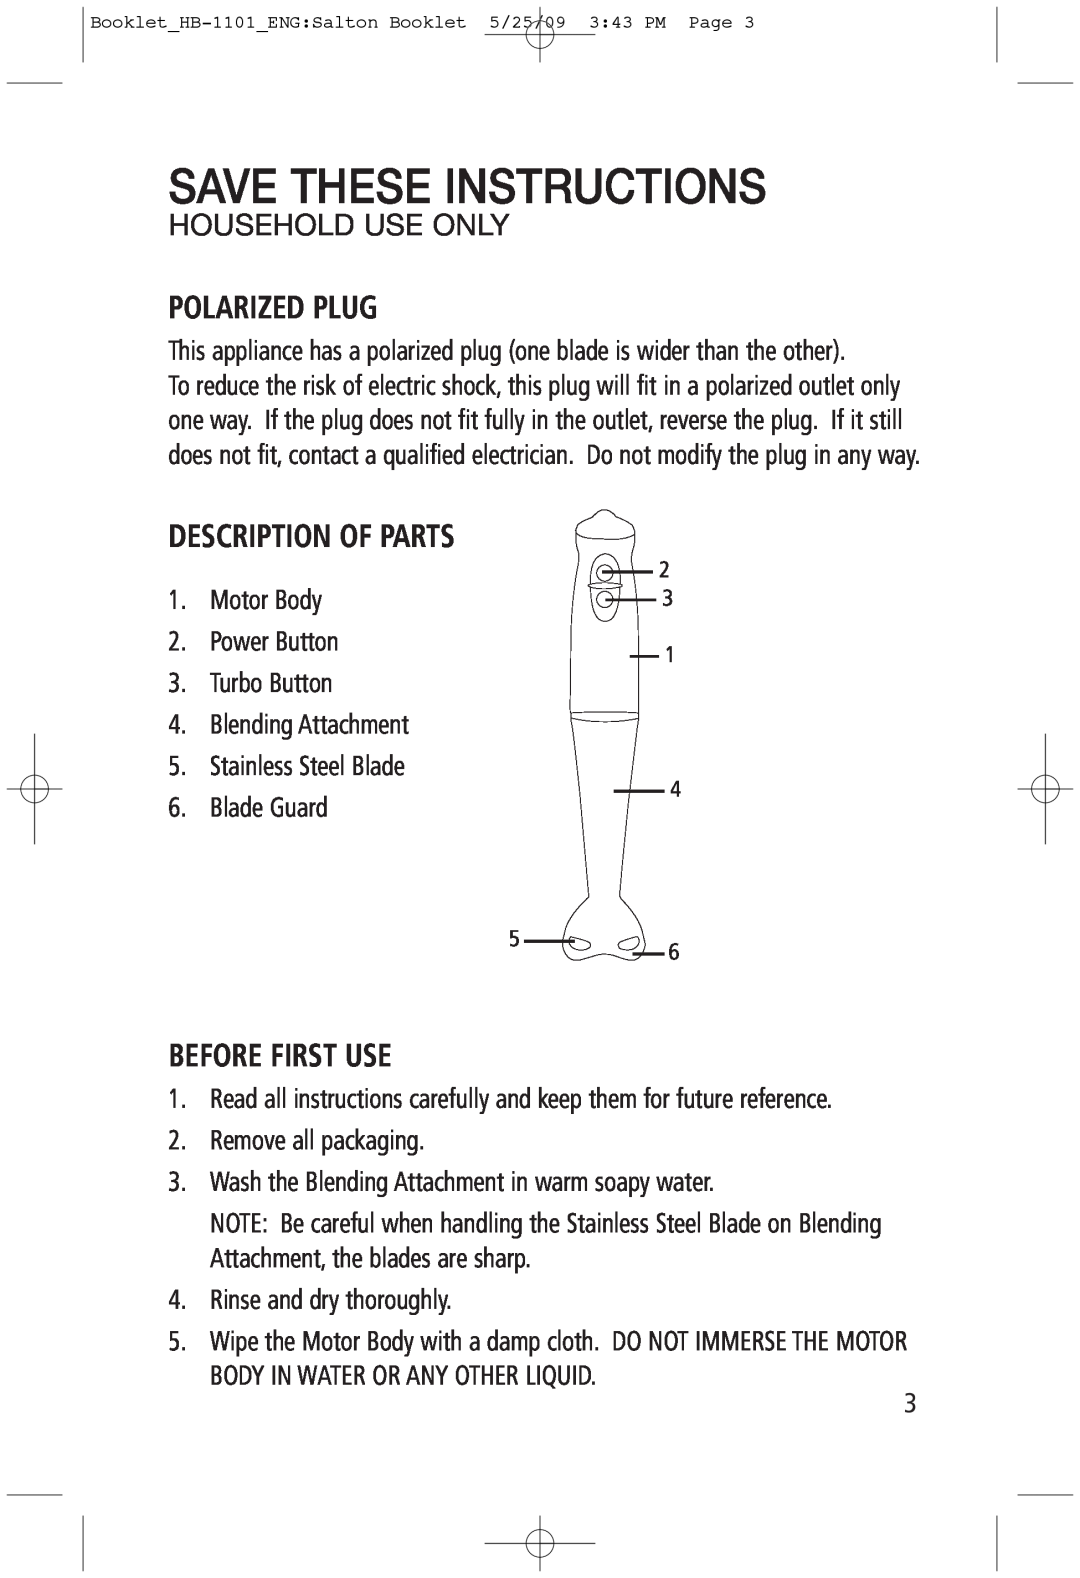 Salton HB-1101 manual Polarized Plug, Description Of Parts, Before First Use, Save These Instructions, Household Use Only 